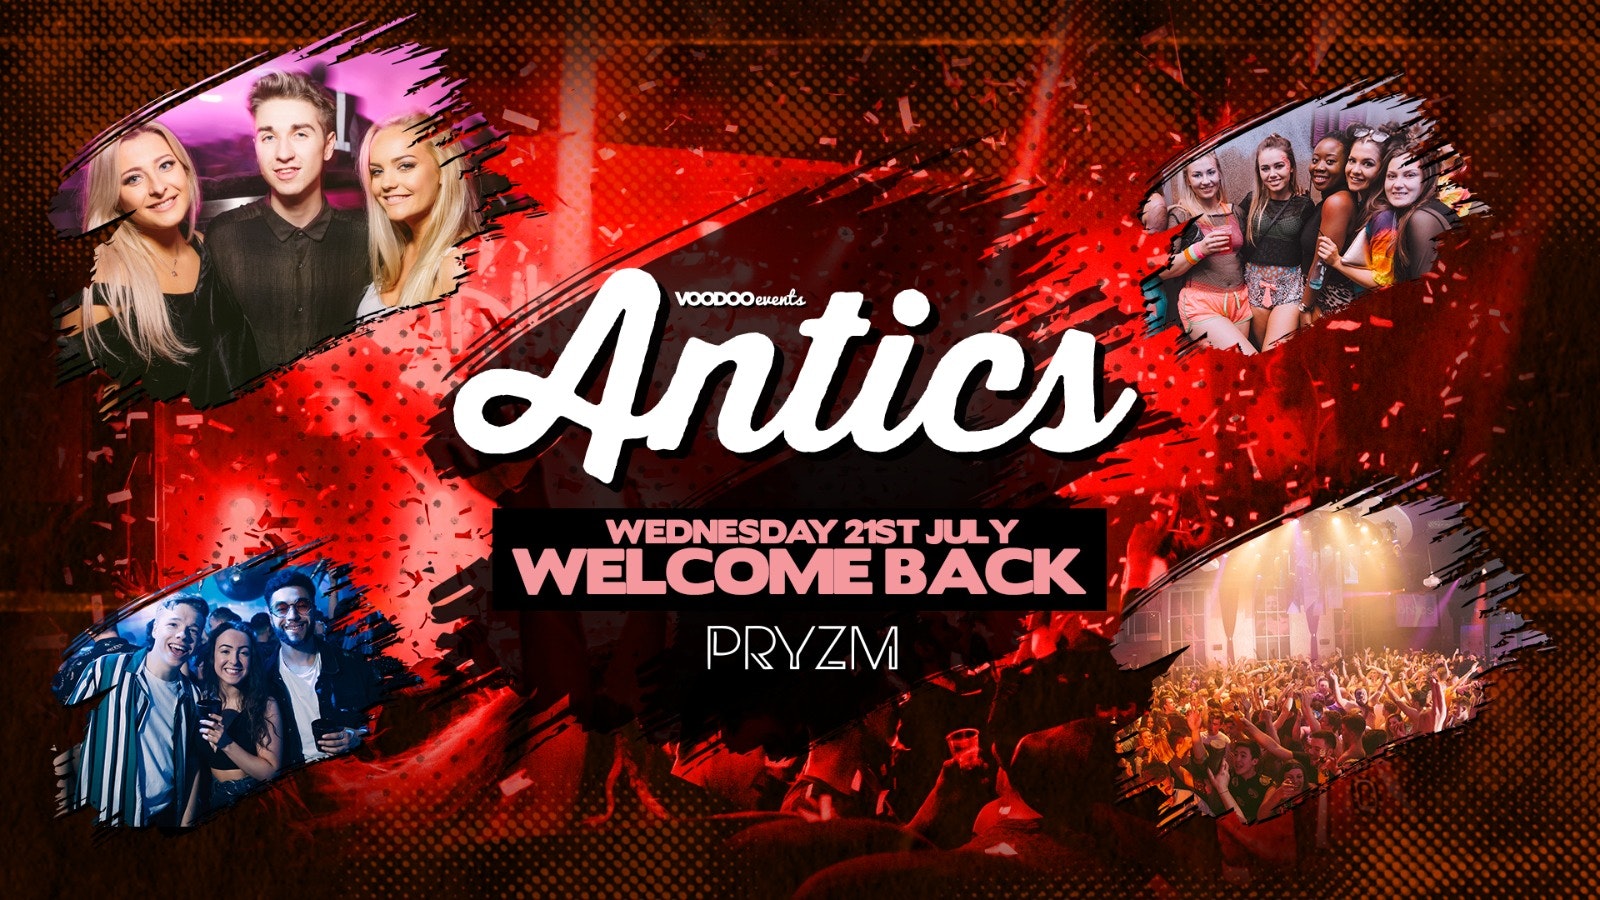 The Comeback – Antics at PRYZM Leeds opening party – 21st July